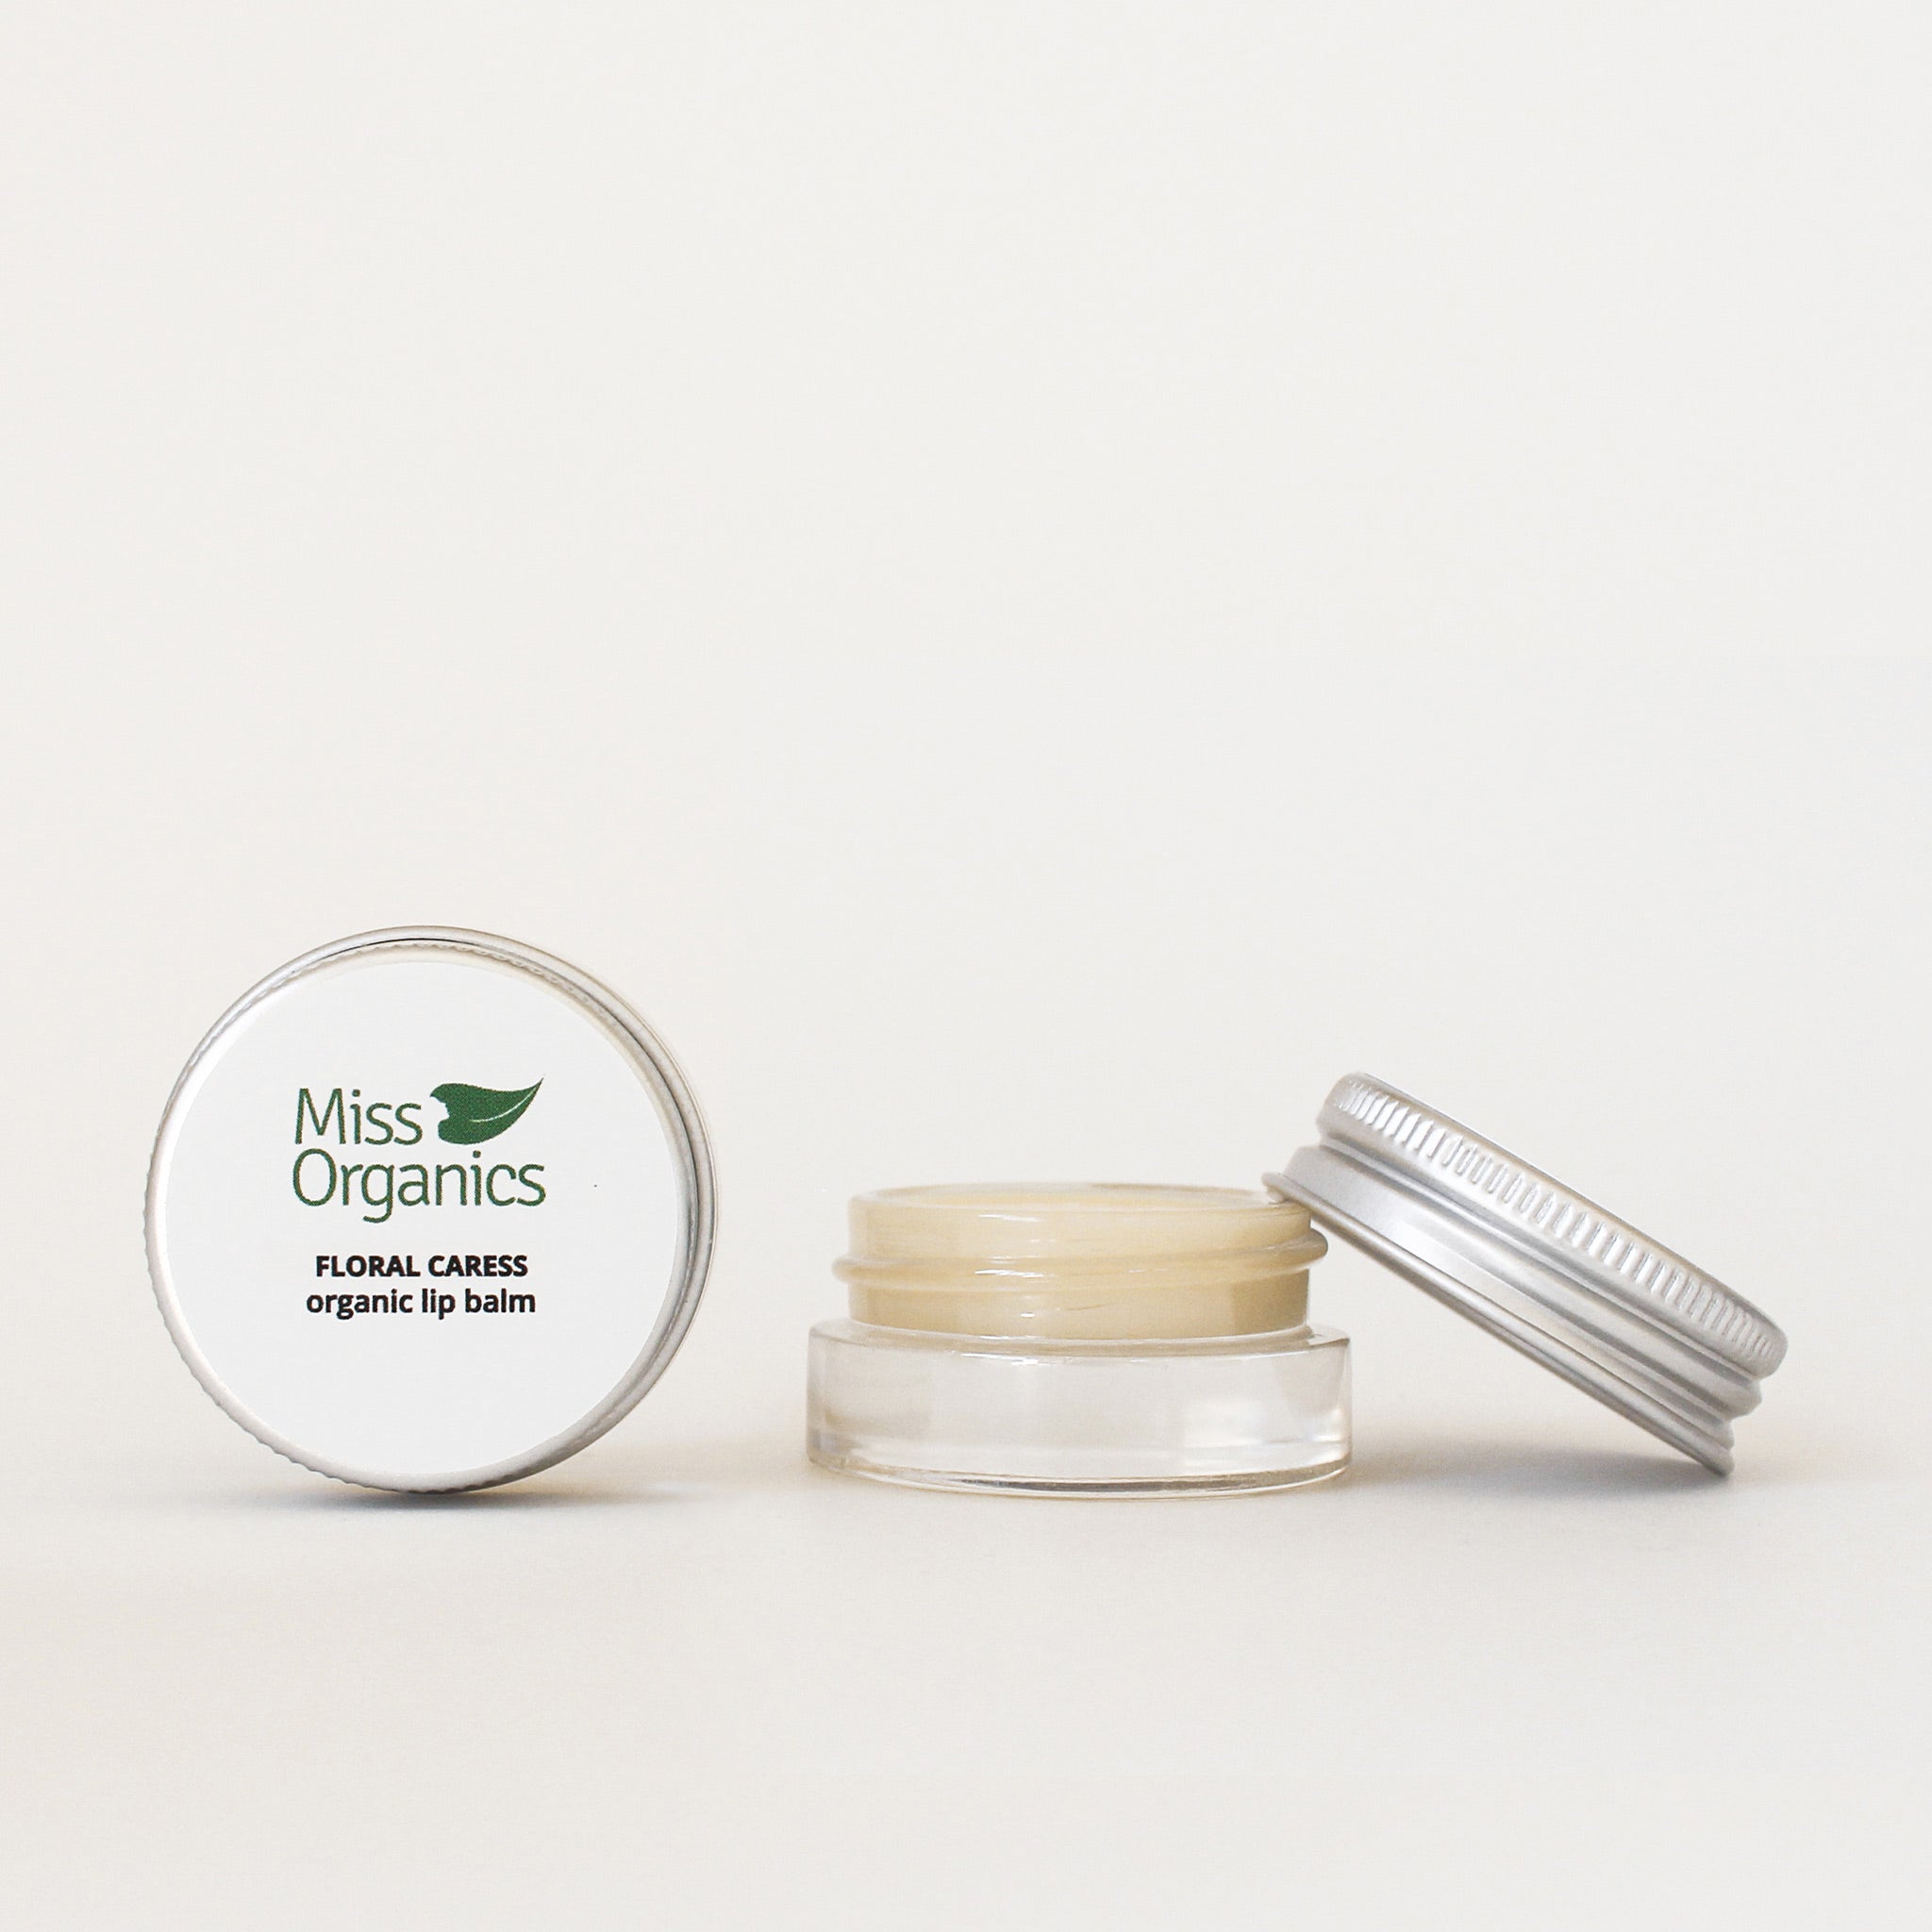 Floral Caress organic lip balm in glass pot with aluminium lid resting on pot on plain cream background